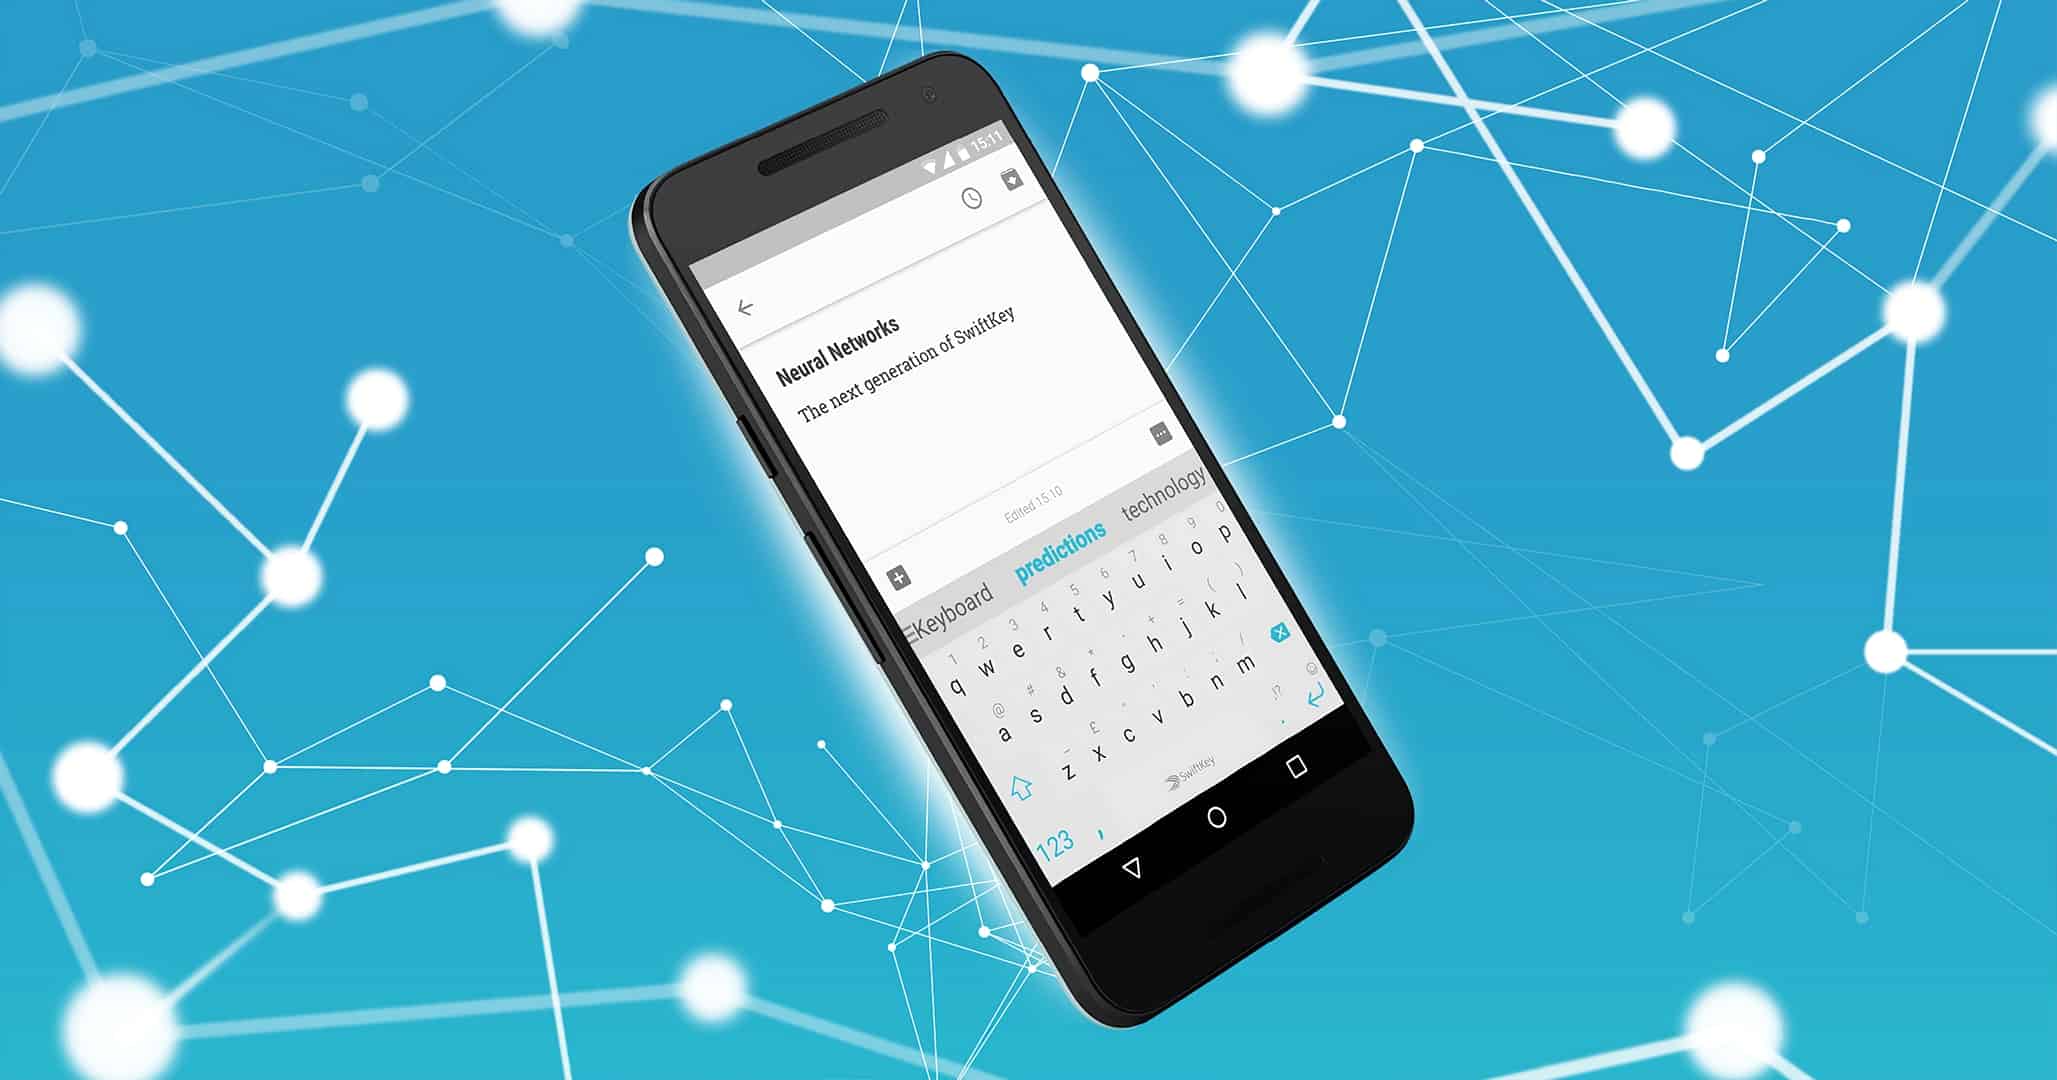 The original phone keyboard app is good enough, if you want to get more options, using a standalone keyboard software is usually a good idea. Keyboard Apps